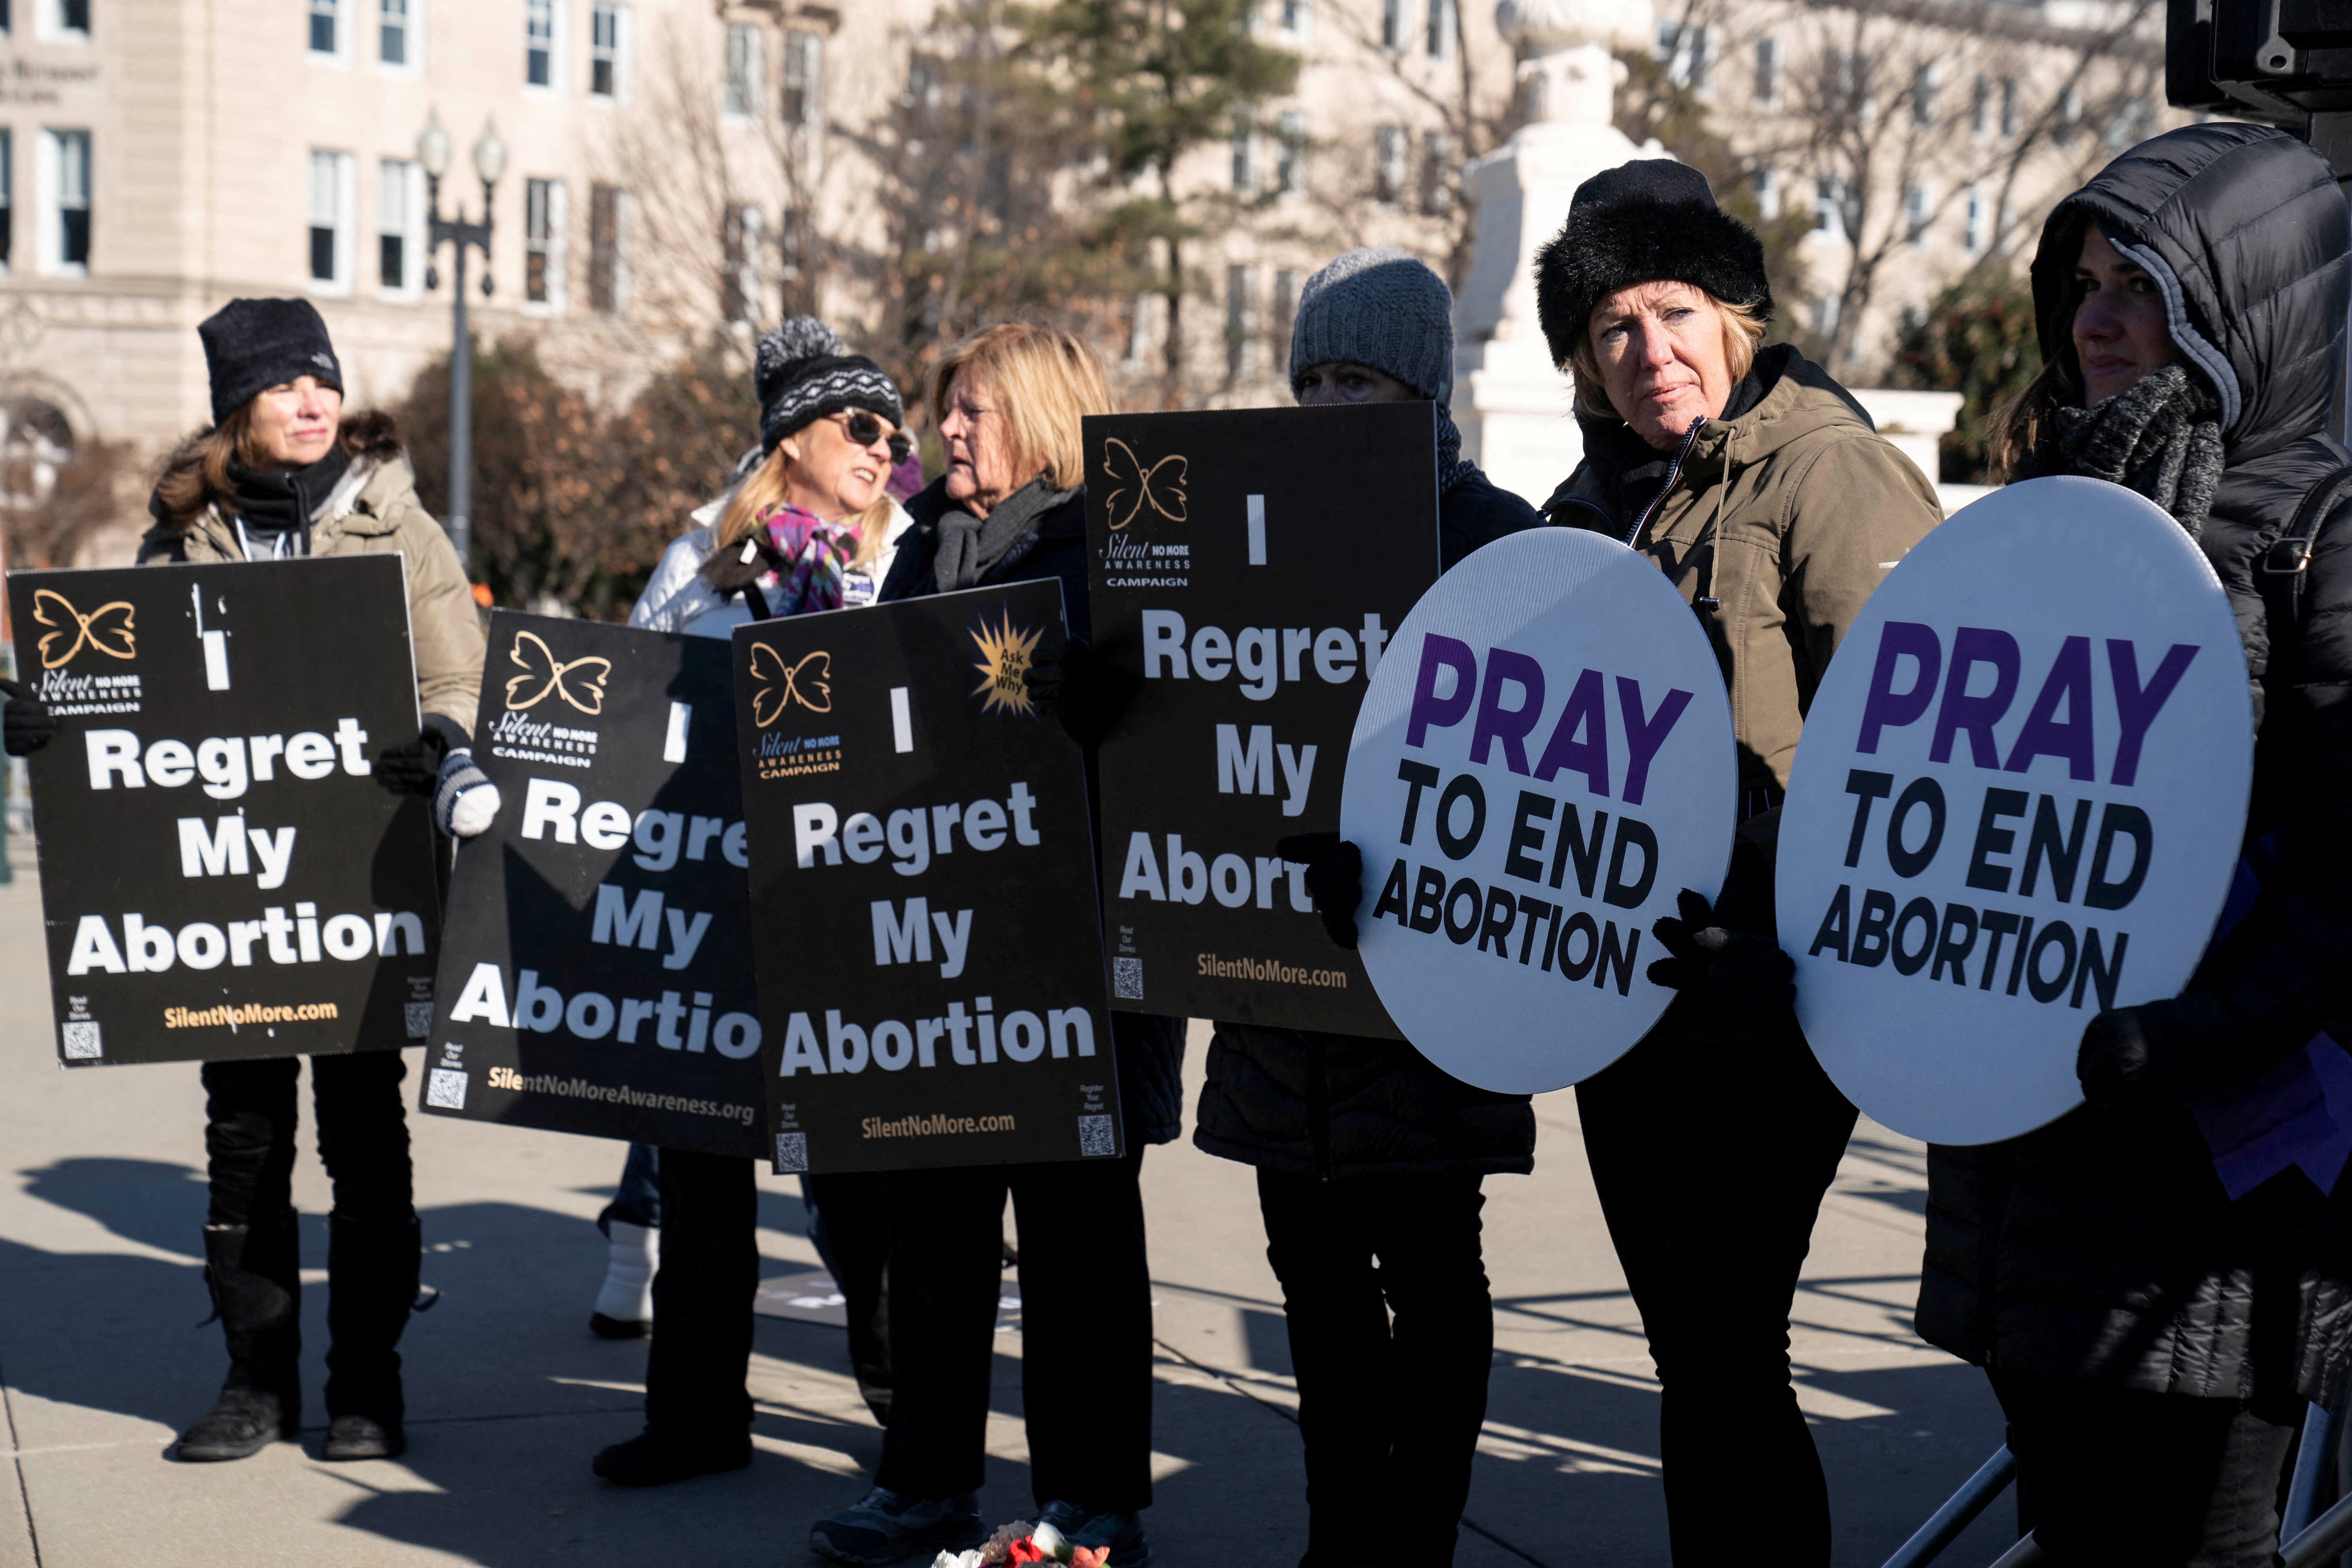 Activists hold anti-choice demonstration on anniversary of Roe v. Wade at U.S. Supreme Court in Washington